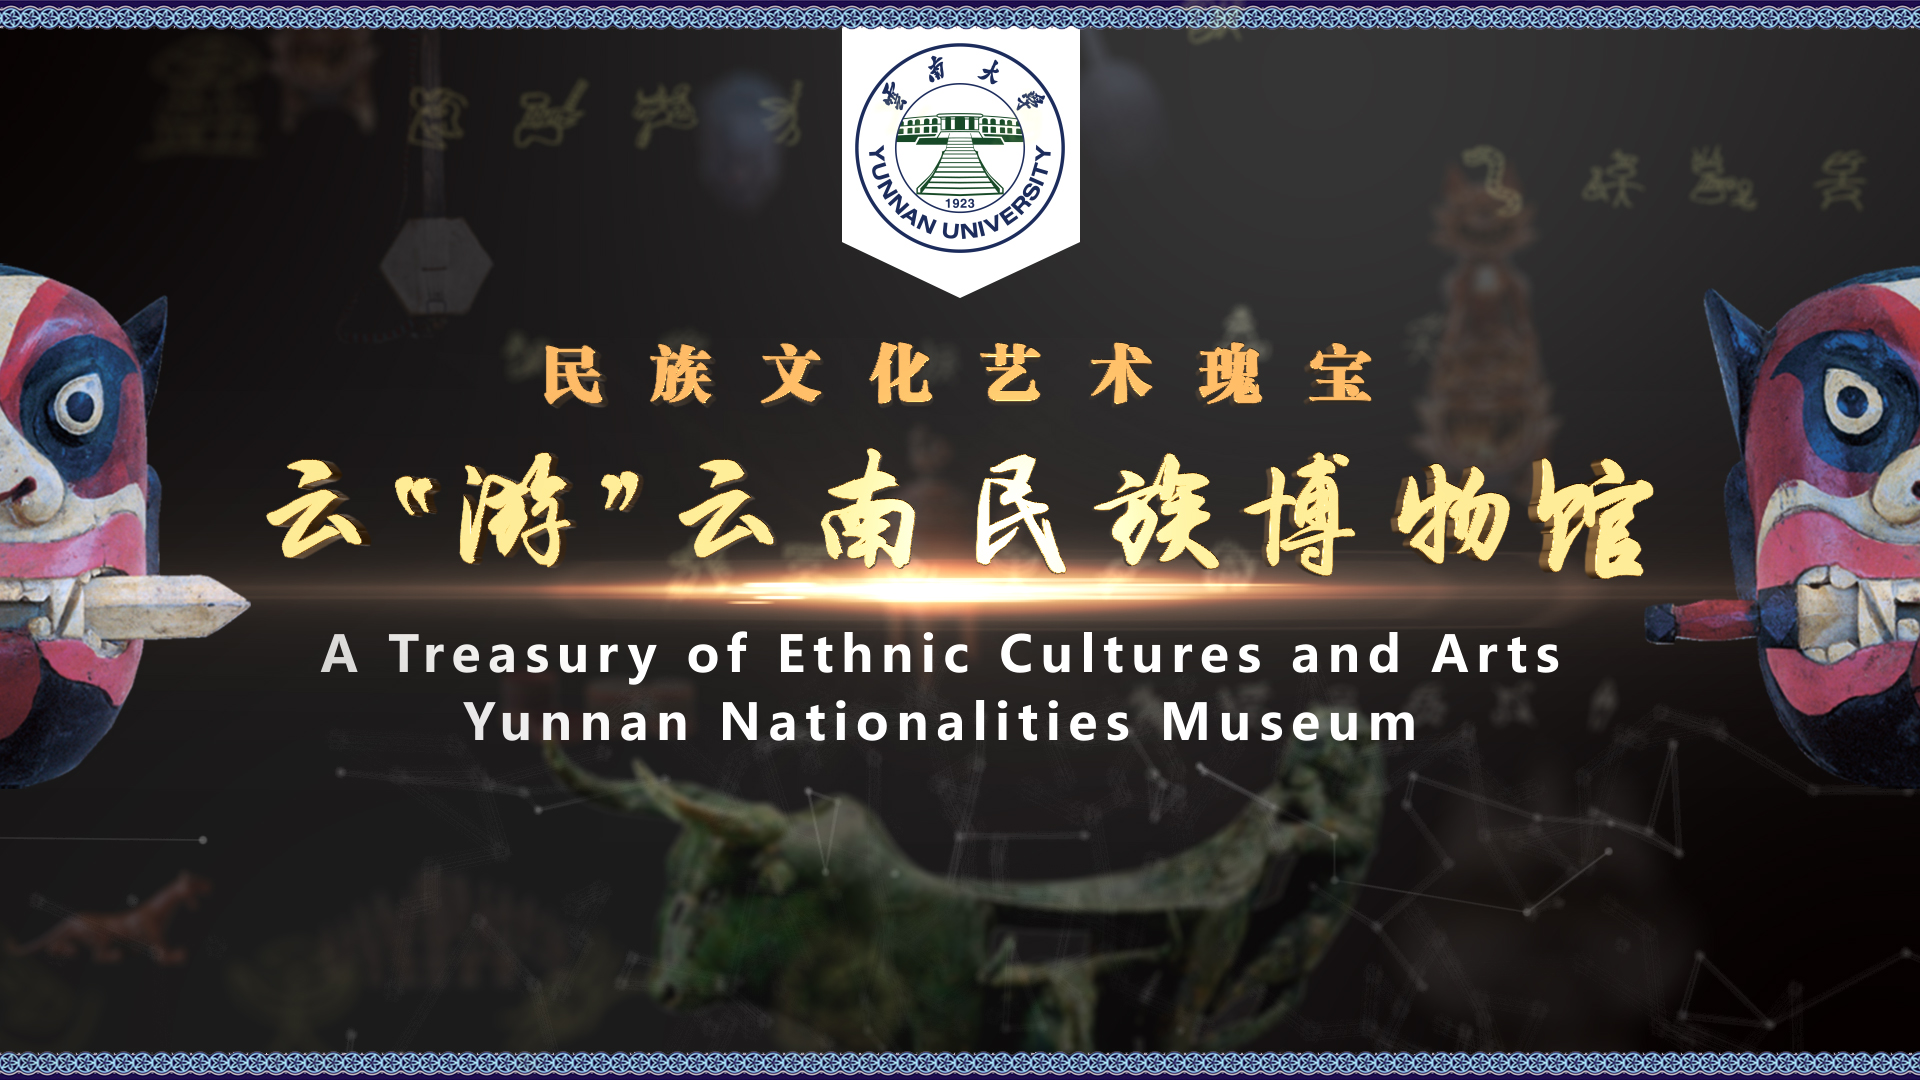 A Treasury of Ethnic Cultures and Arts --An Online Tour at Yunnan Nationalities Museum